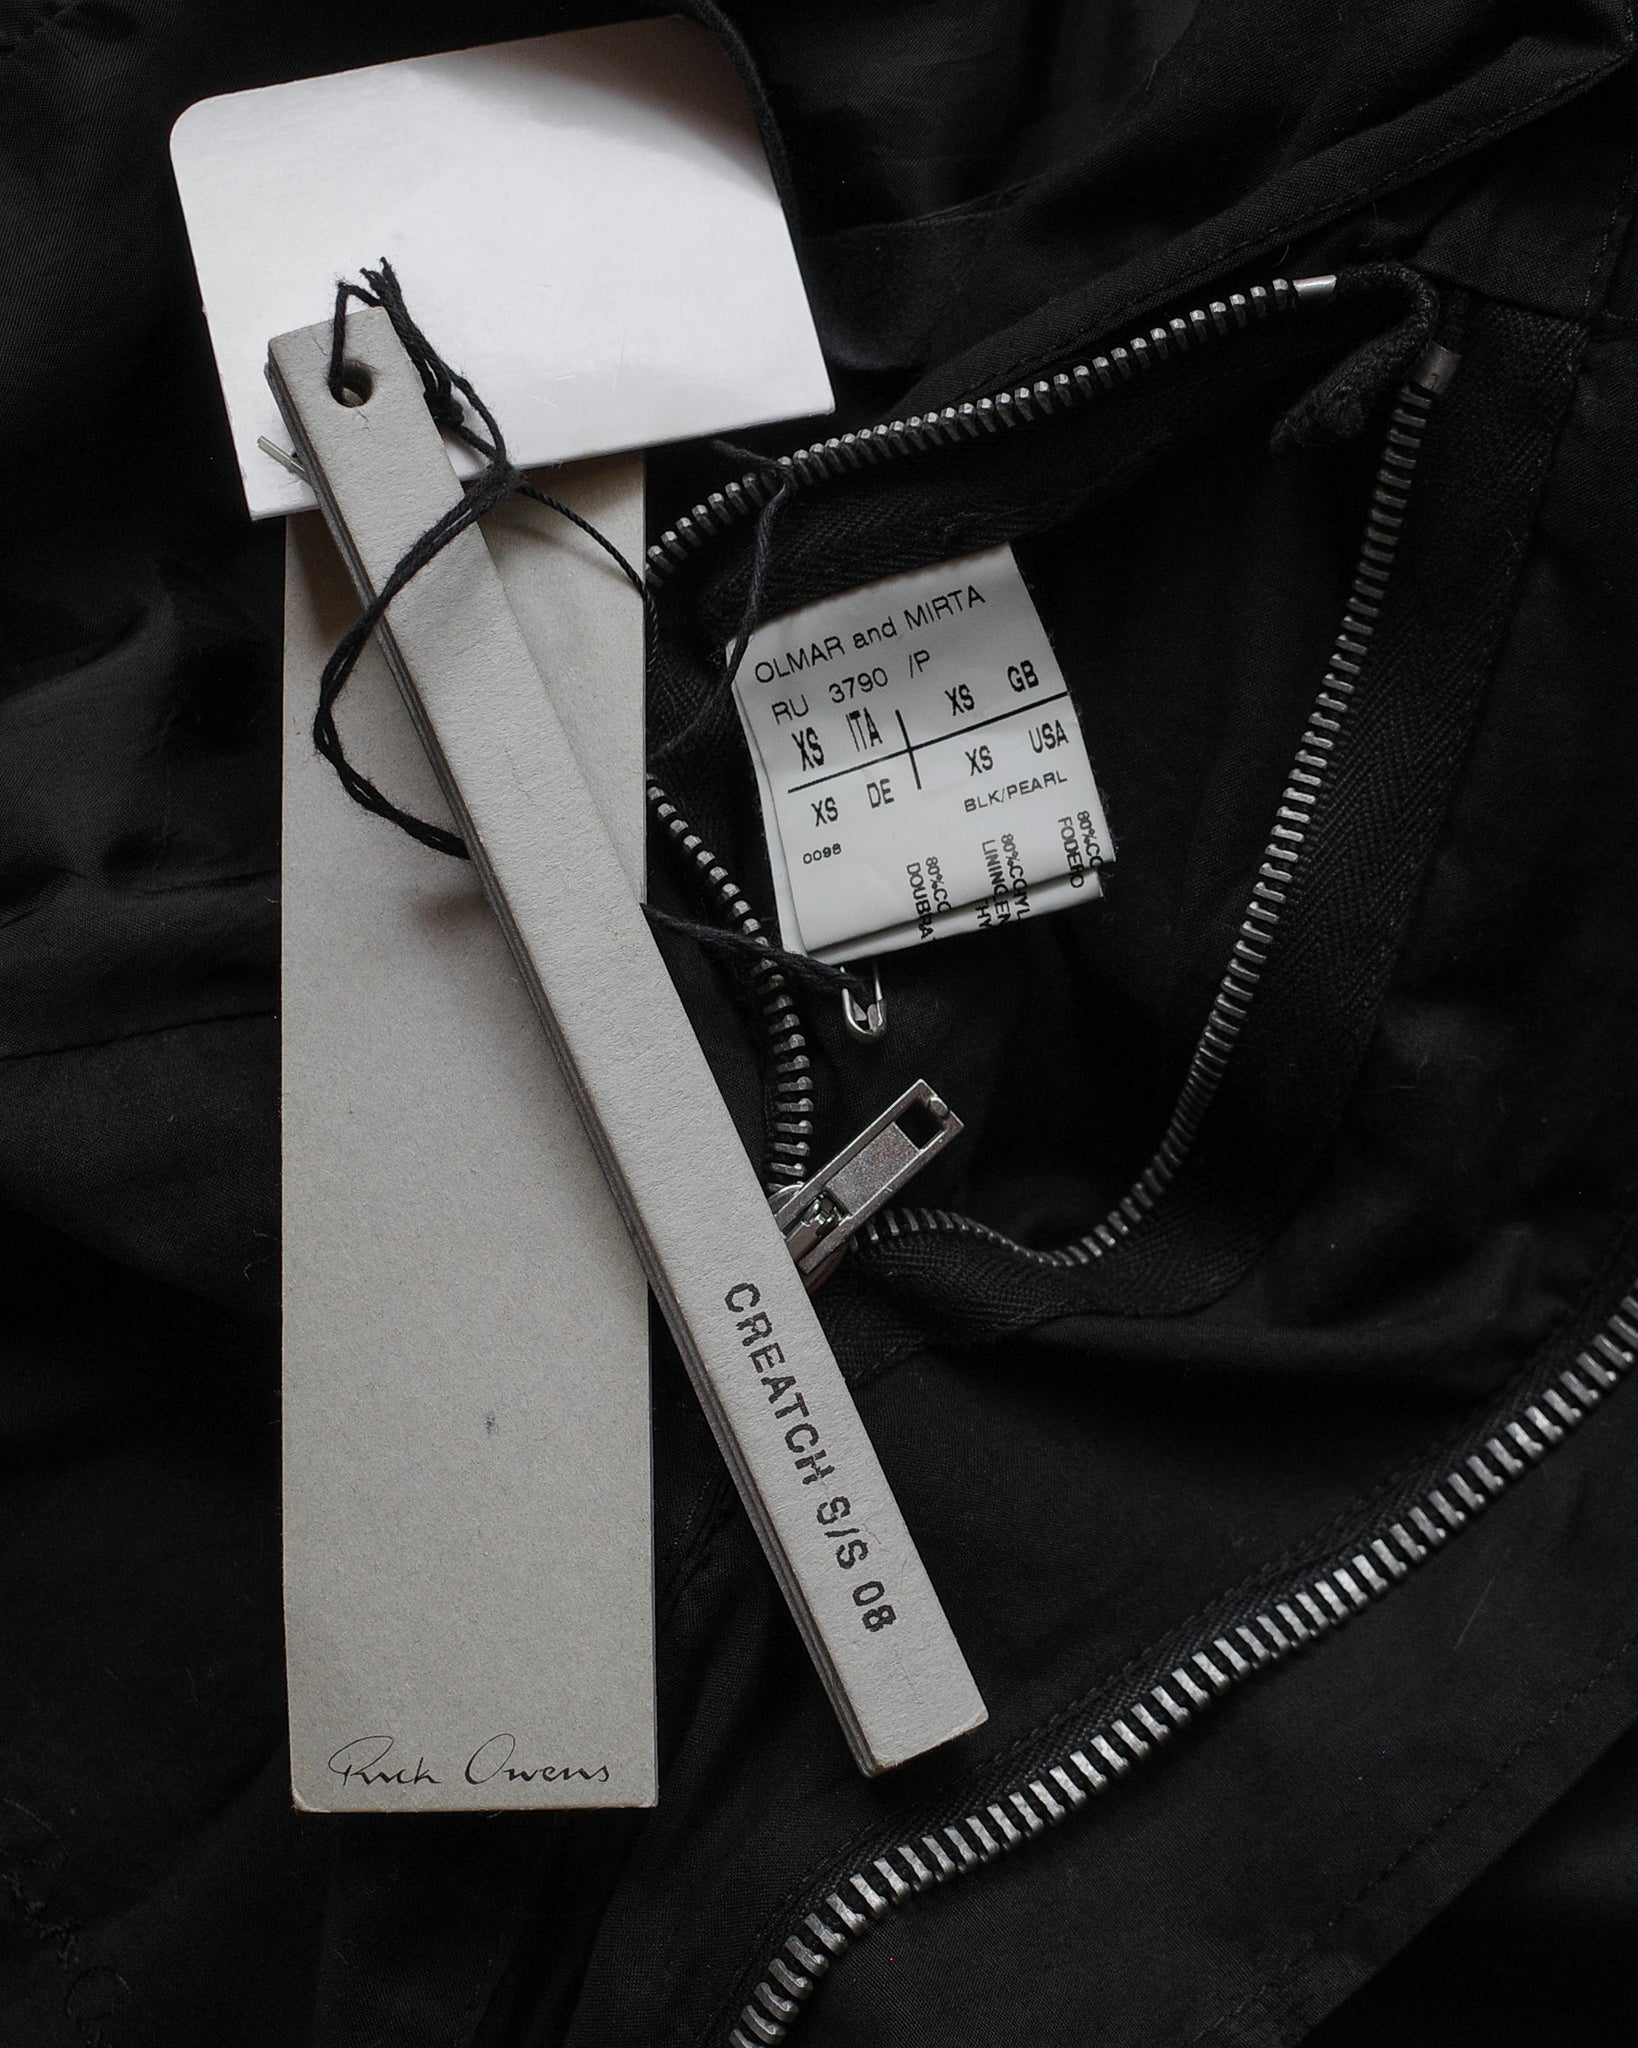 Rick Owens SS08 Patched F-1 Jacket